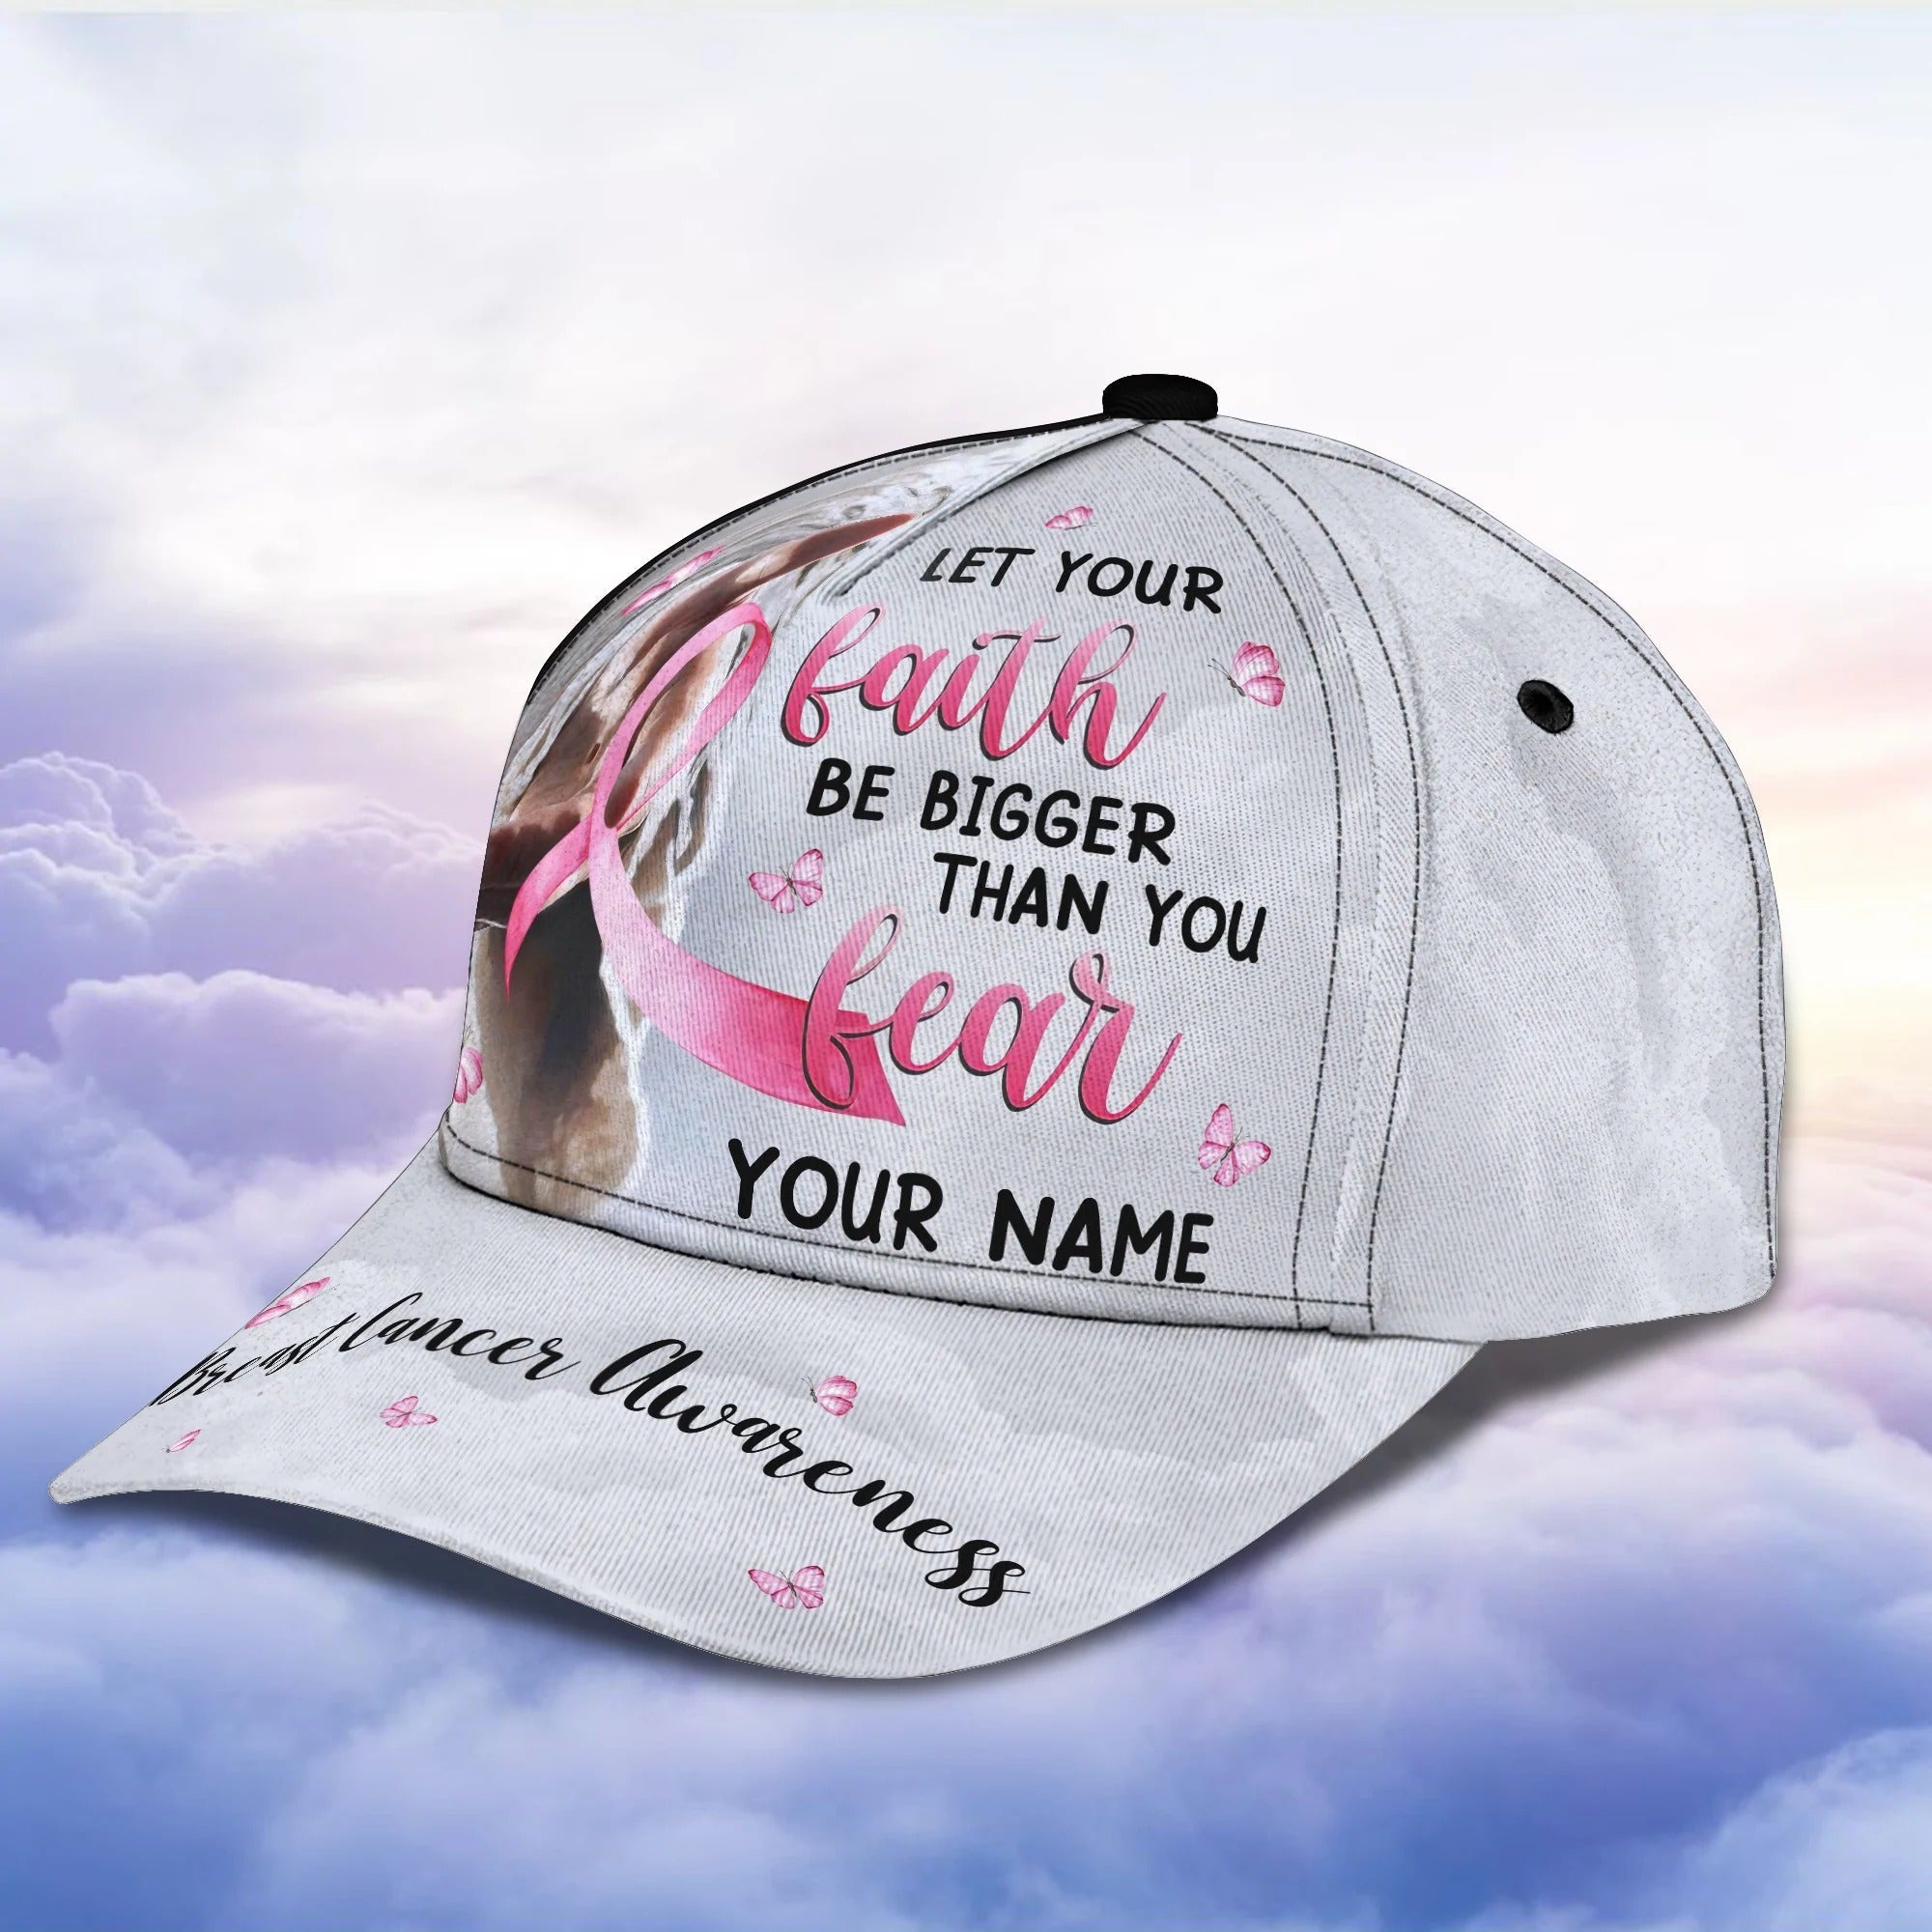 Personalized Breast Cancer Hat/ Pink Cancer Classic Cap Hat/ Breast Cancer Awareness Cap Hat